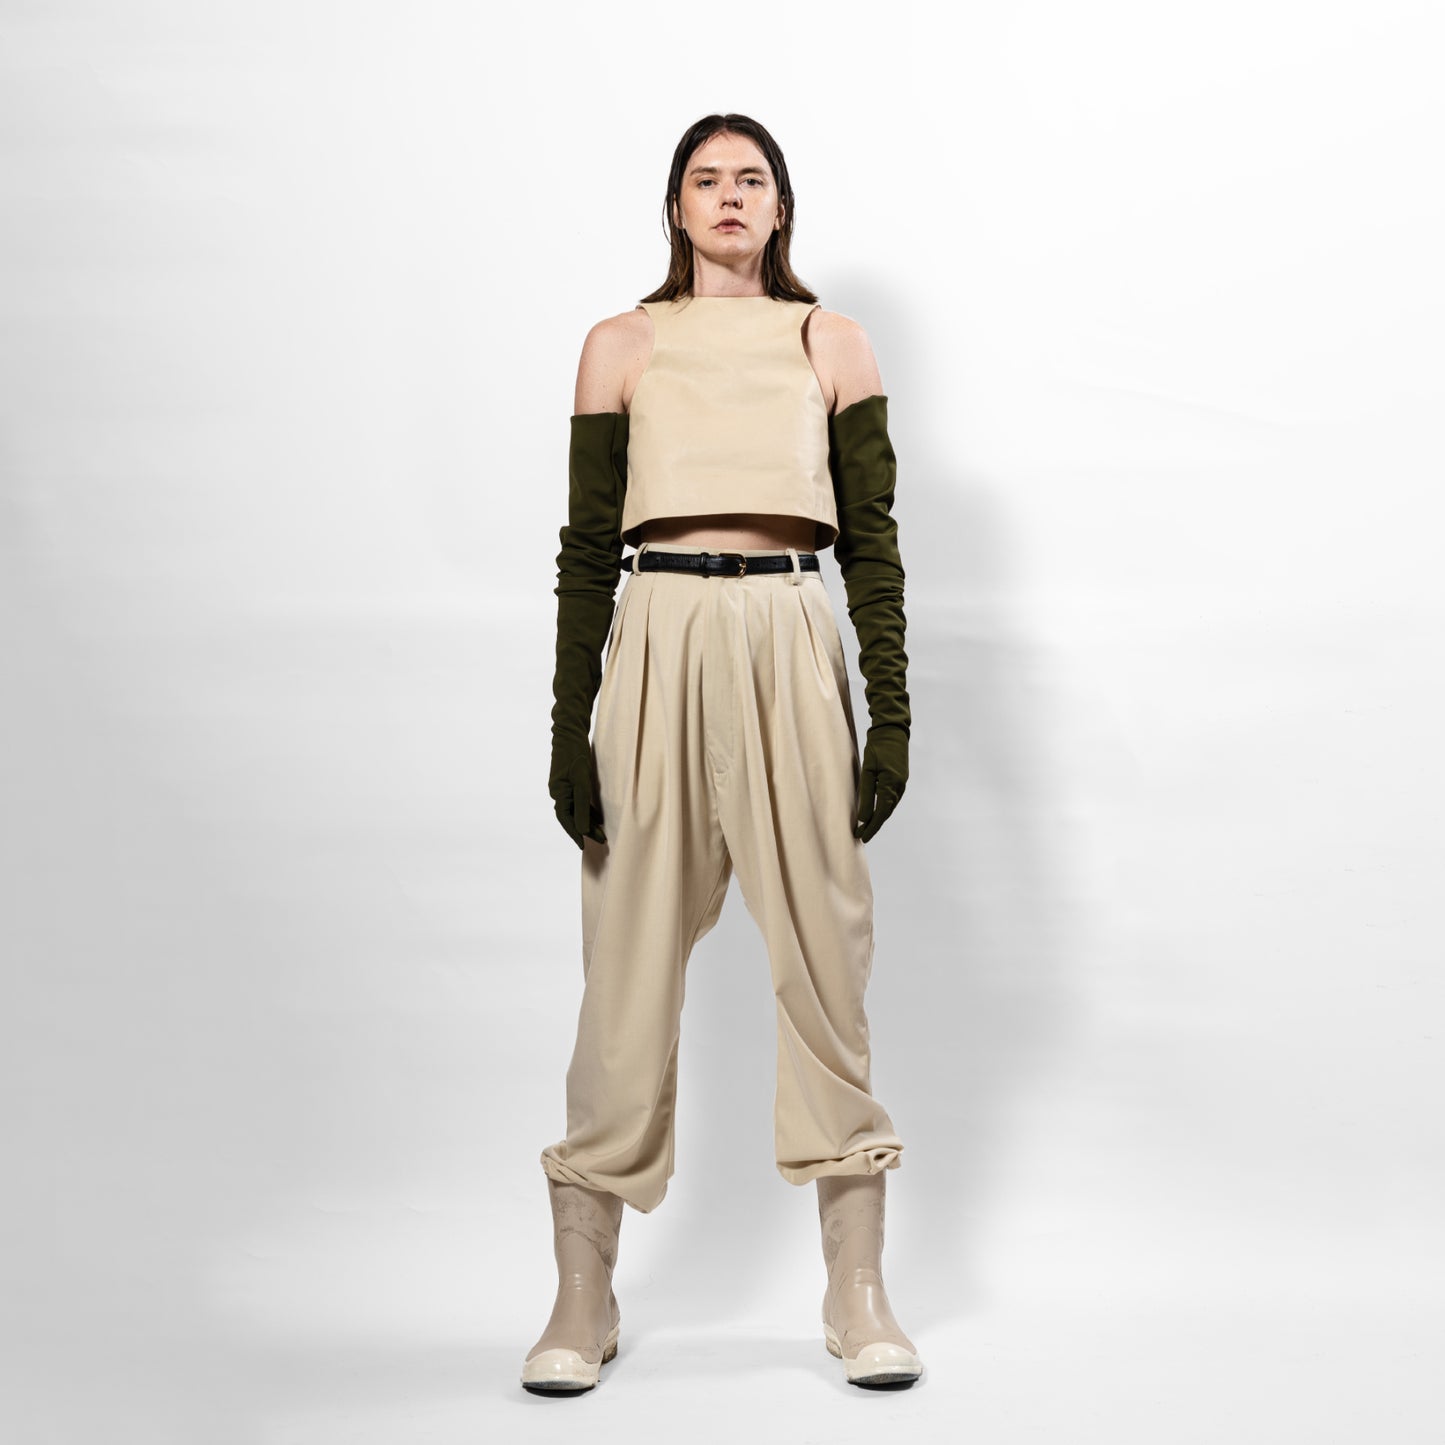 Tulip Pants- Straight Wide leg pants with front pleats